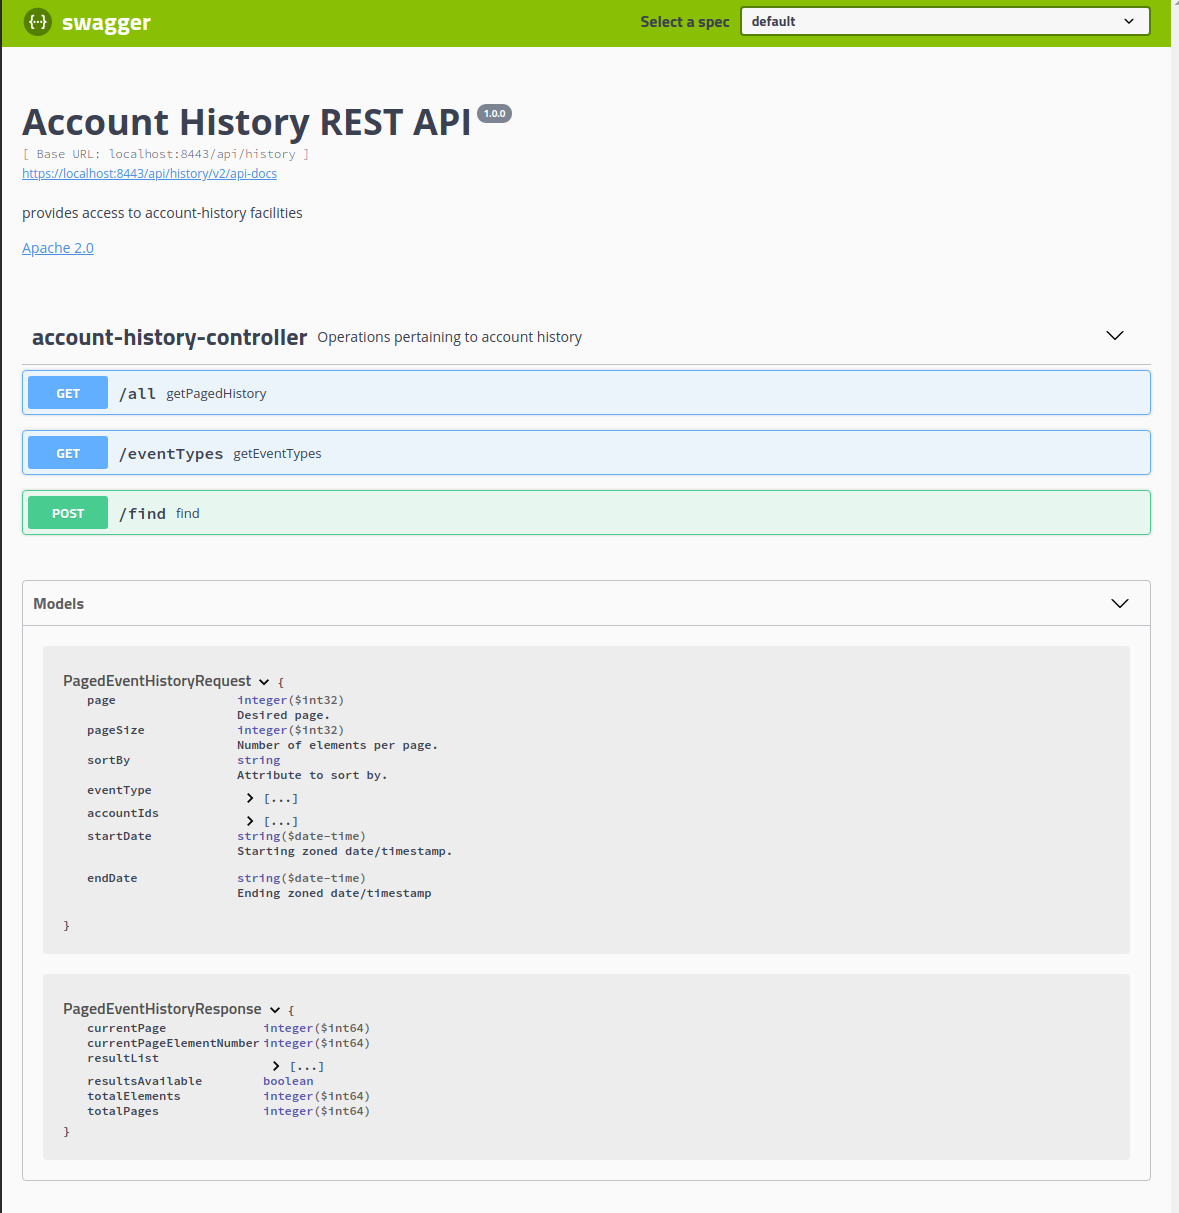 Account History Swagger UI